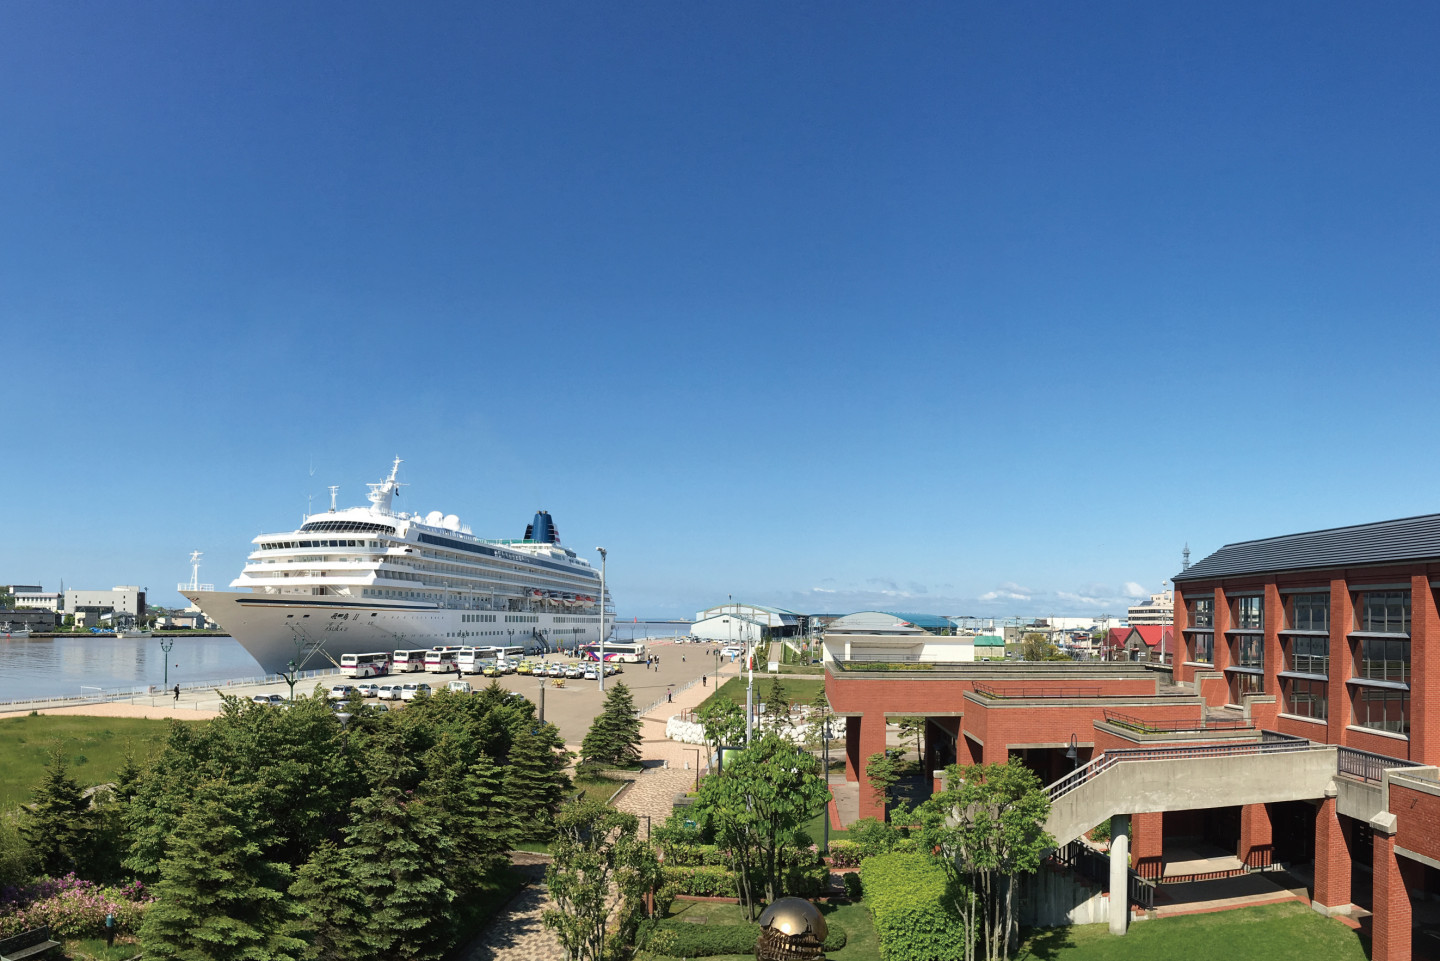 Don’t get lost – Kushiro has two cruise terminals